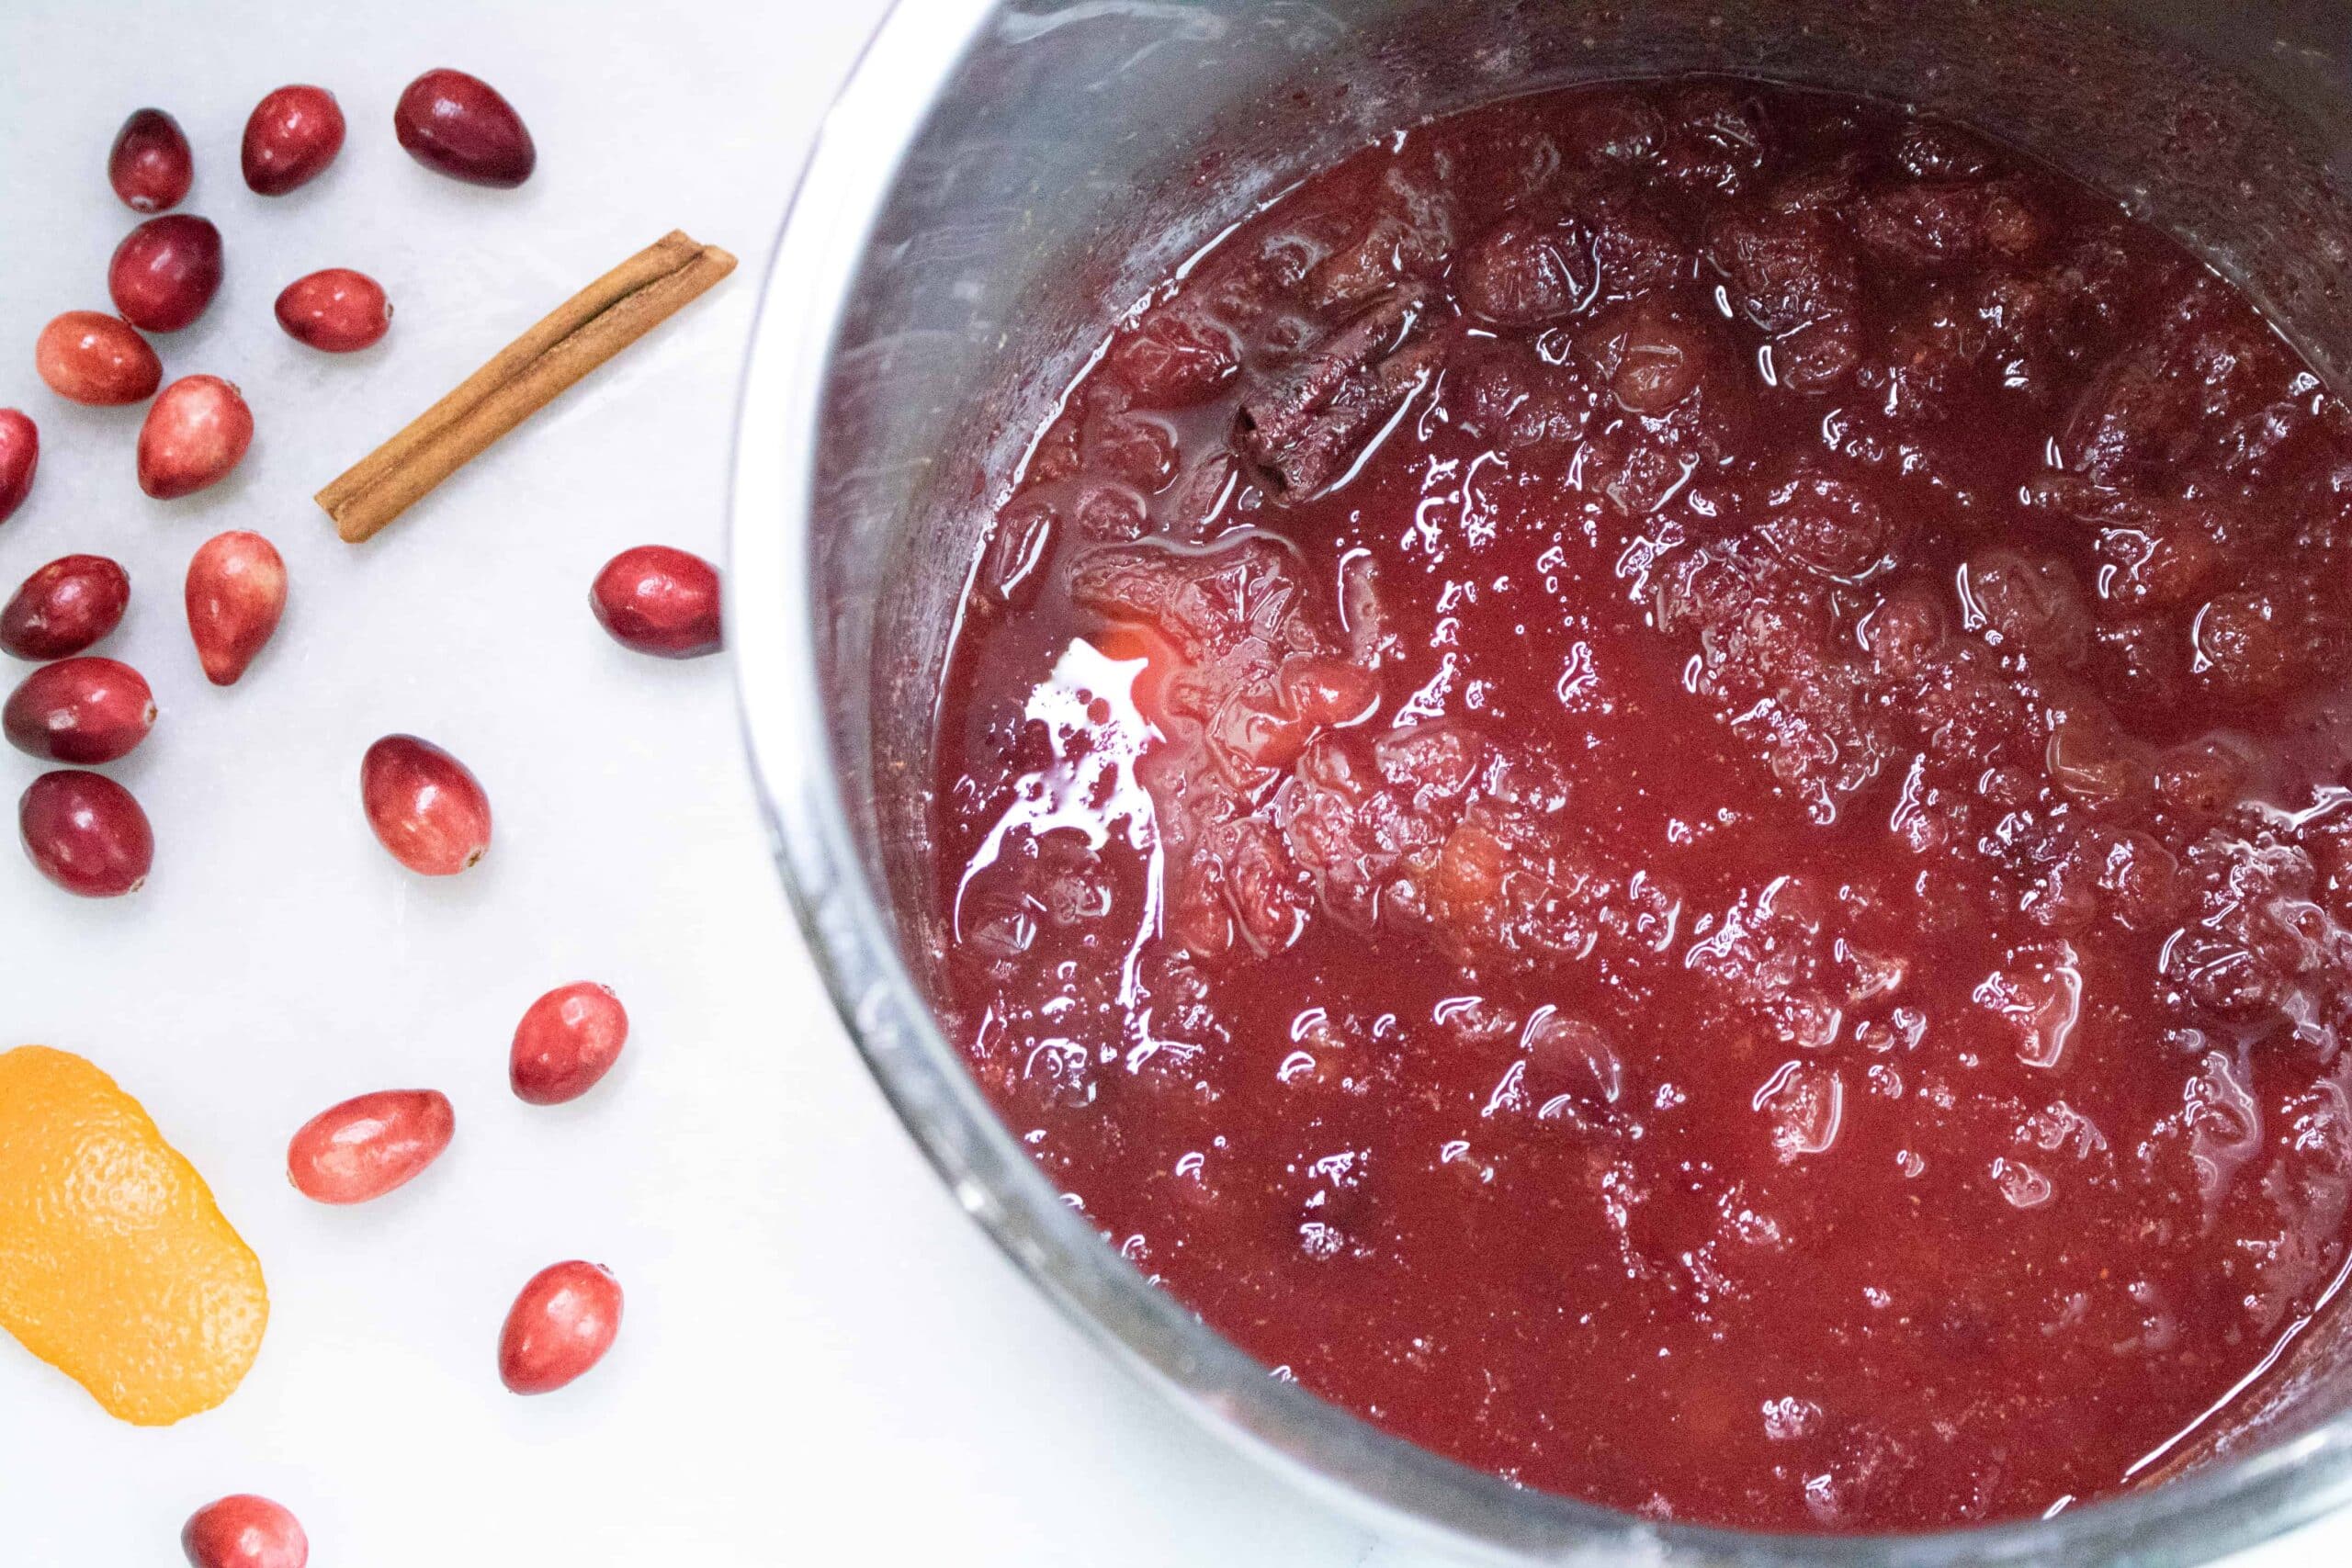 Completed Instant Pot Cranberry Sauce inside the Instant Pot and ready to be served